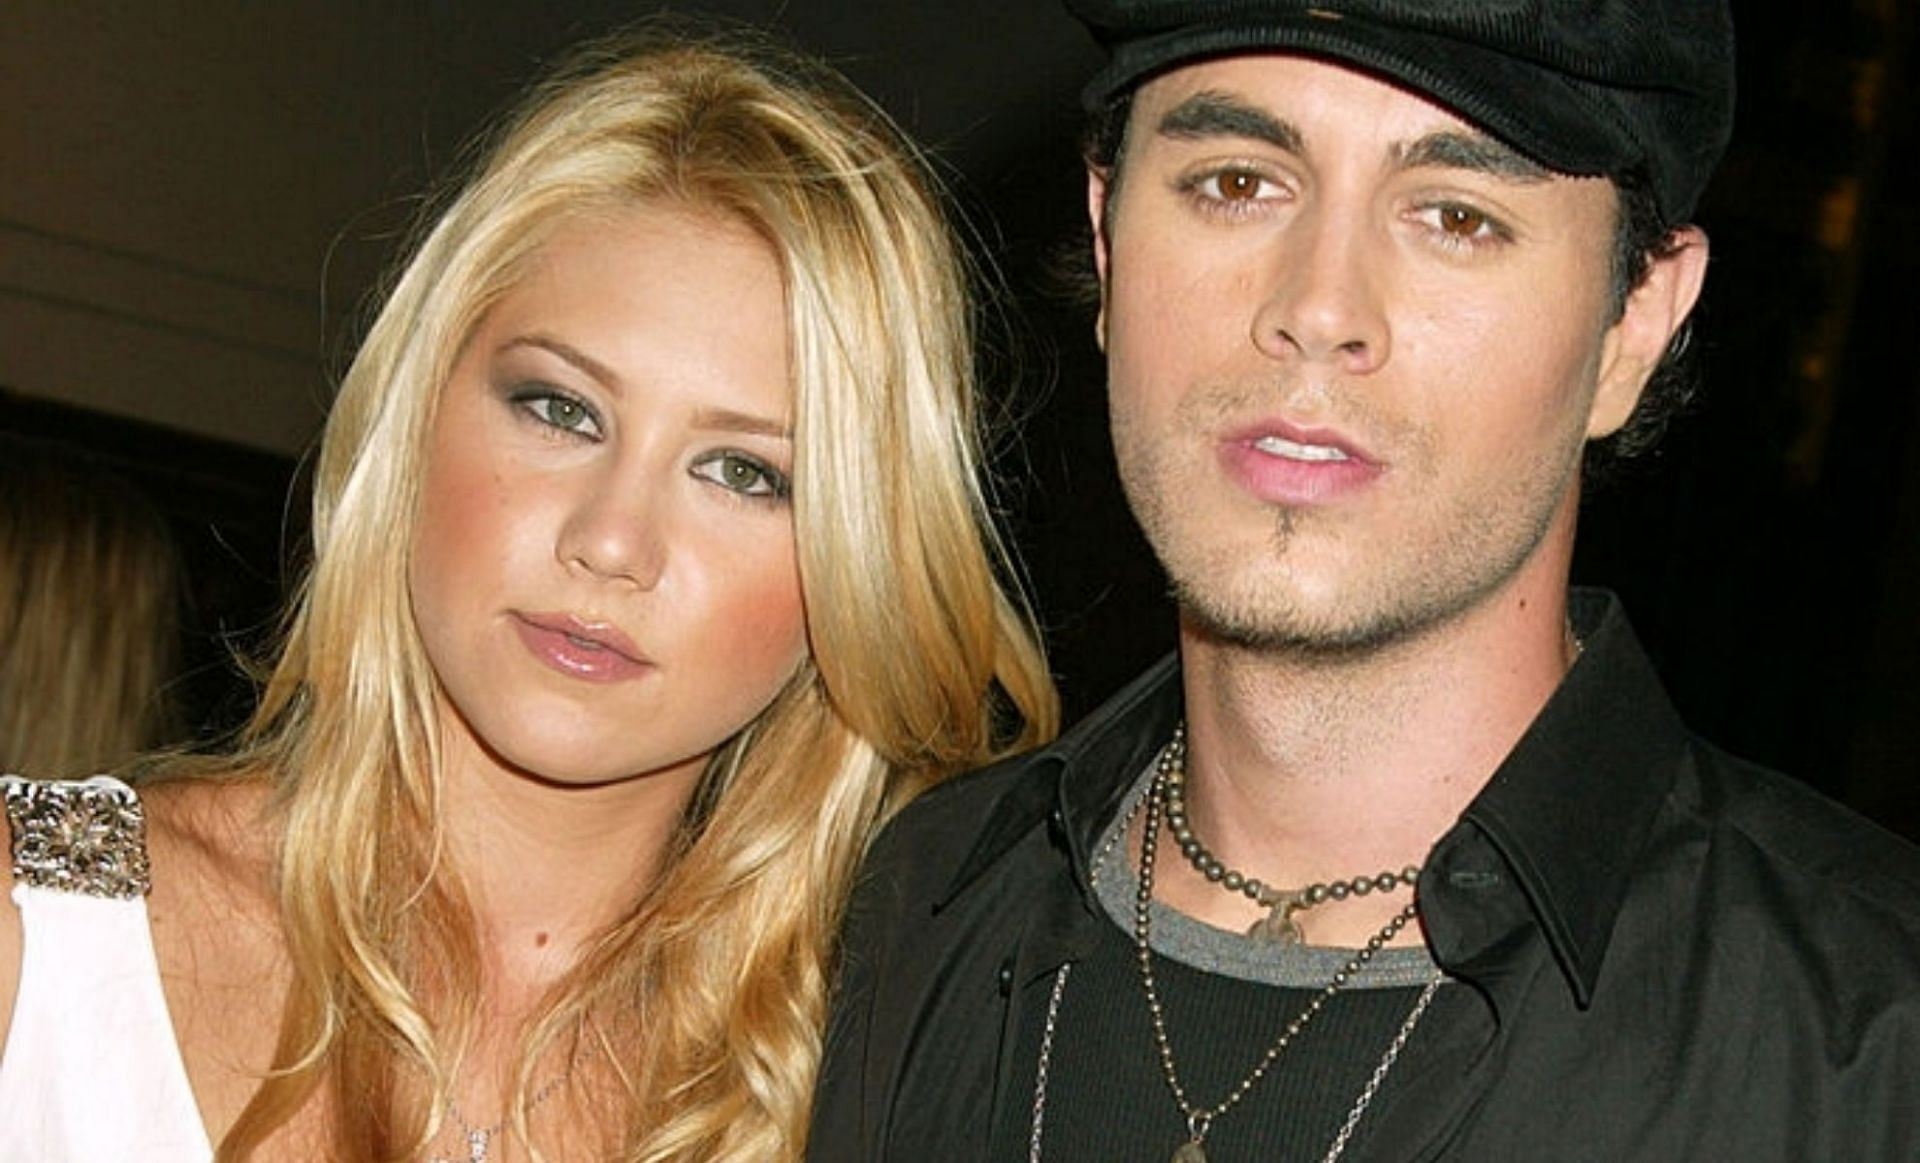 Enrique Iglesias and Anna Kournikova's 3 Kids: All About Lucy, Nicholas and  Mary